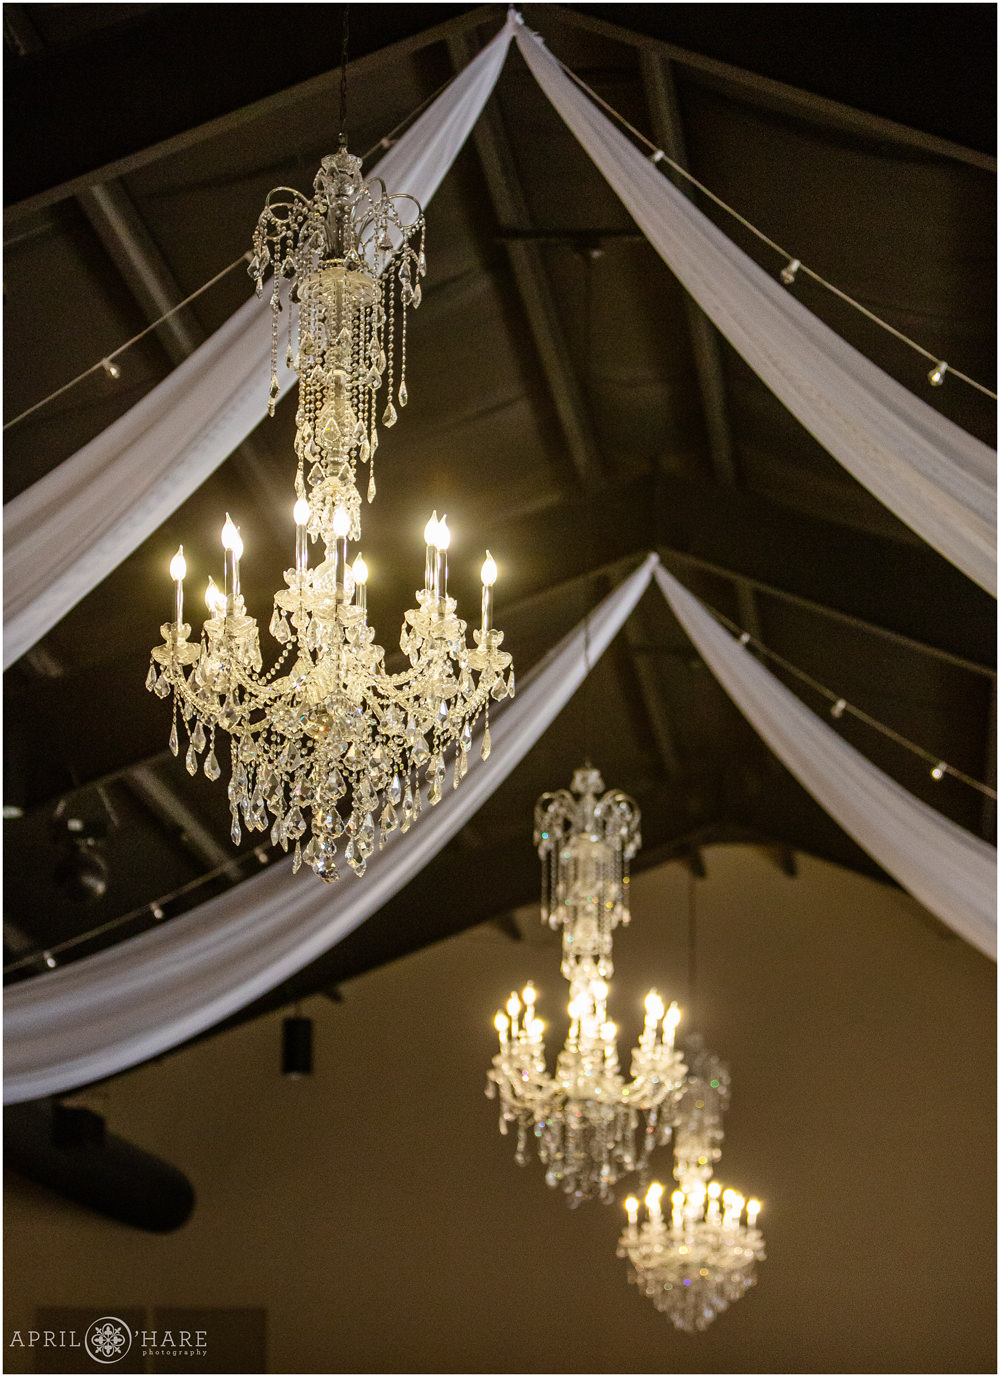 Chandeliers hang from ballroom ceiling at Black Forest Wedgewood Weddings